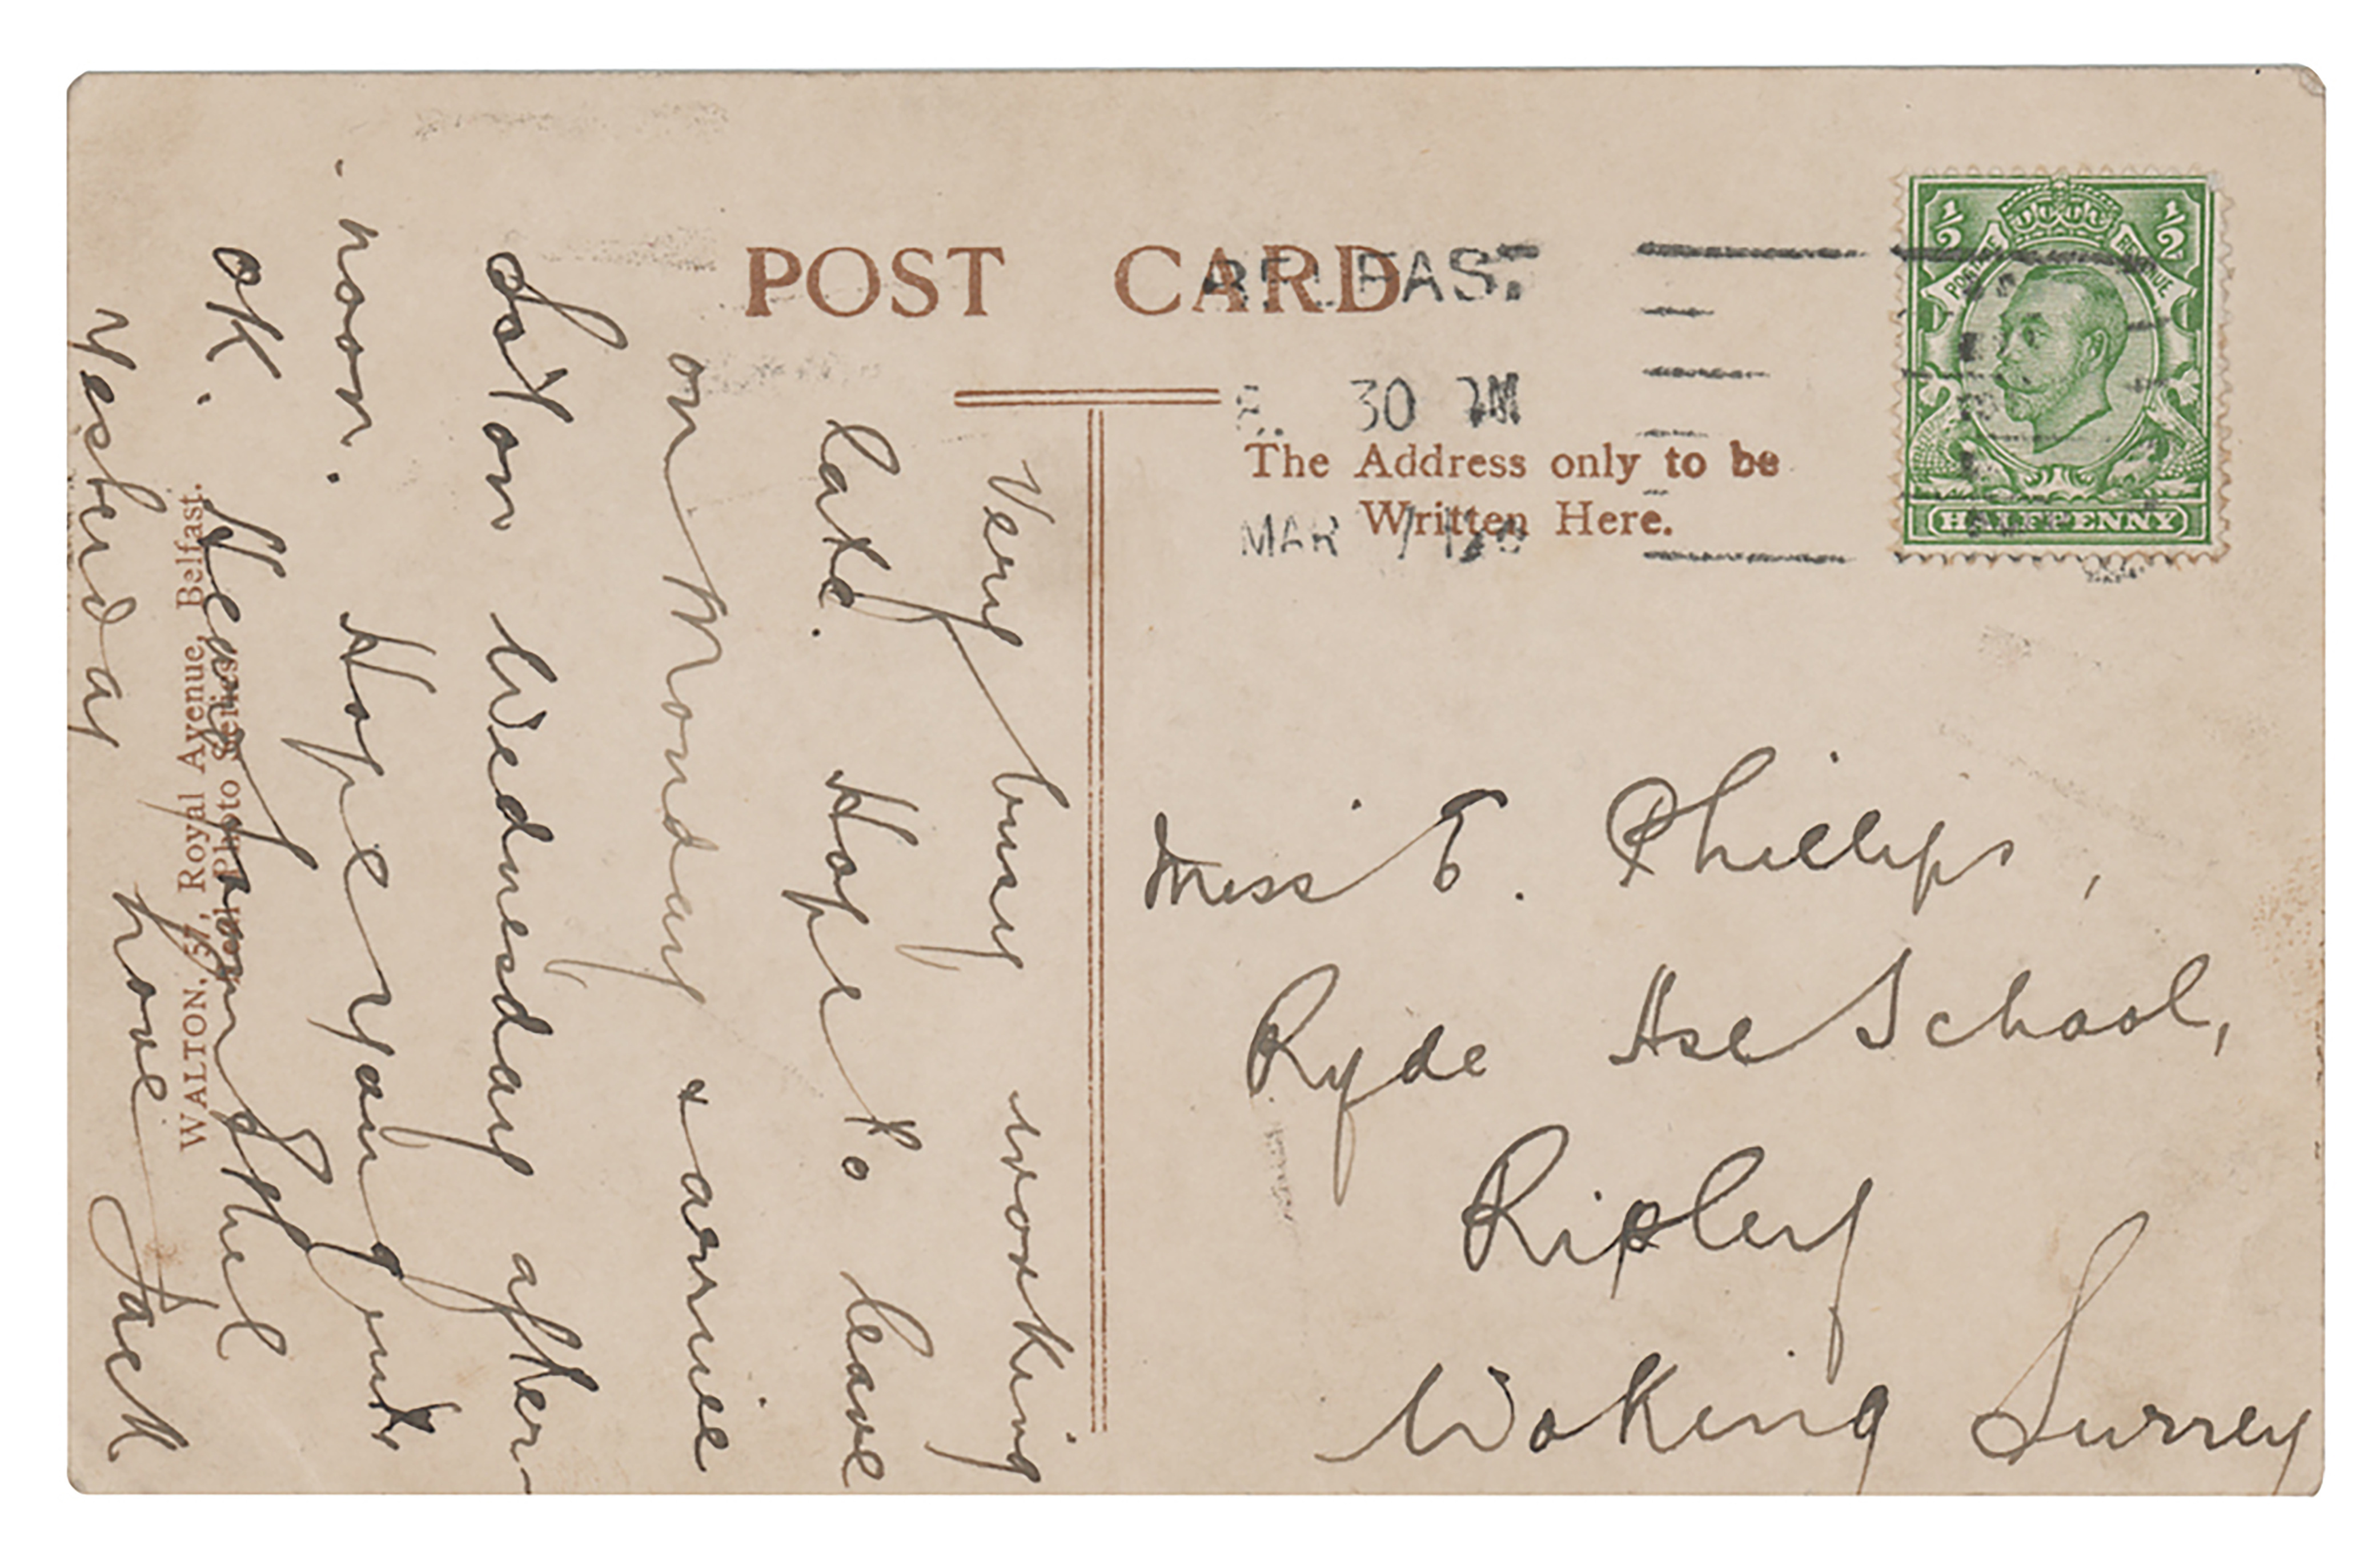 A photocopy of a postcard, provided by RR Auction, with a message written in March 1912 by the Titanic's senior wireless operator Jack Phillips, is shown with a postage stamp attached